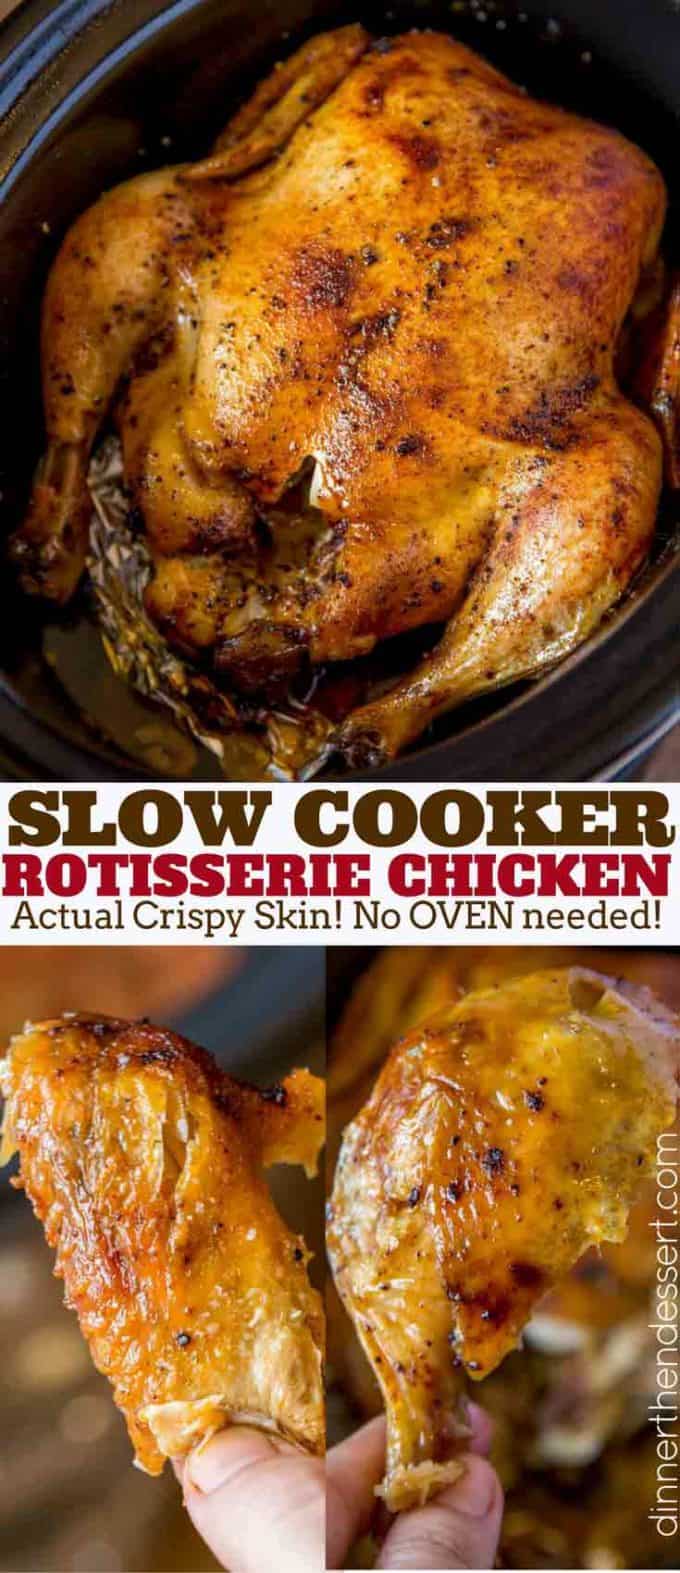 Slow Cooker Rotisserie Chicken made with just a few spices and in the slow cooker with CRISPY skin without a second spent in the oven! #slowcooker #rotisseriechicken #recipe #chicken.